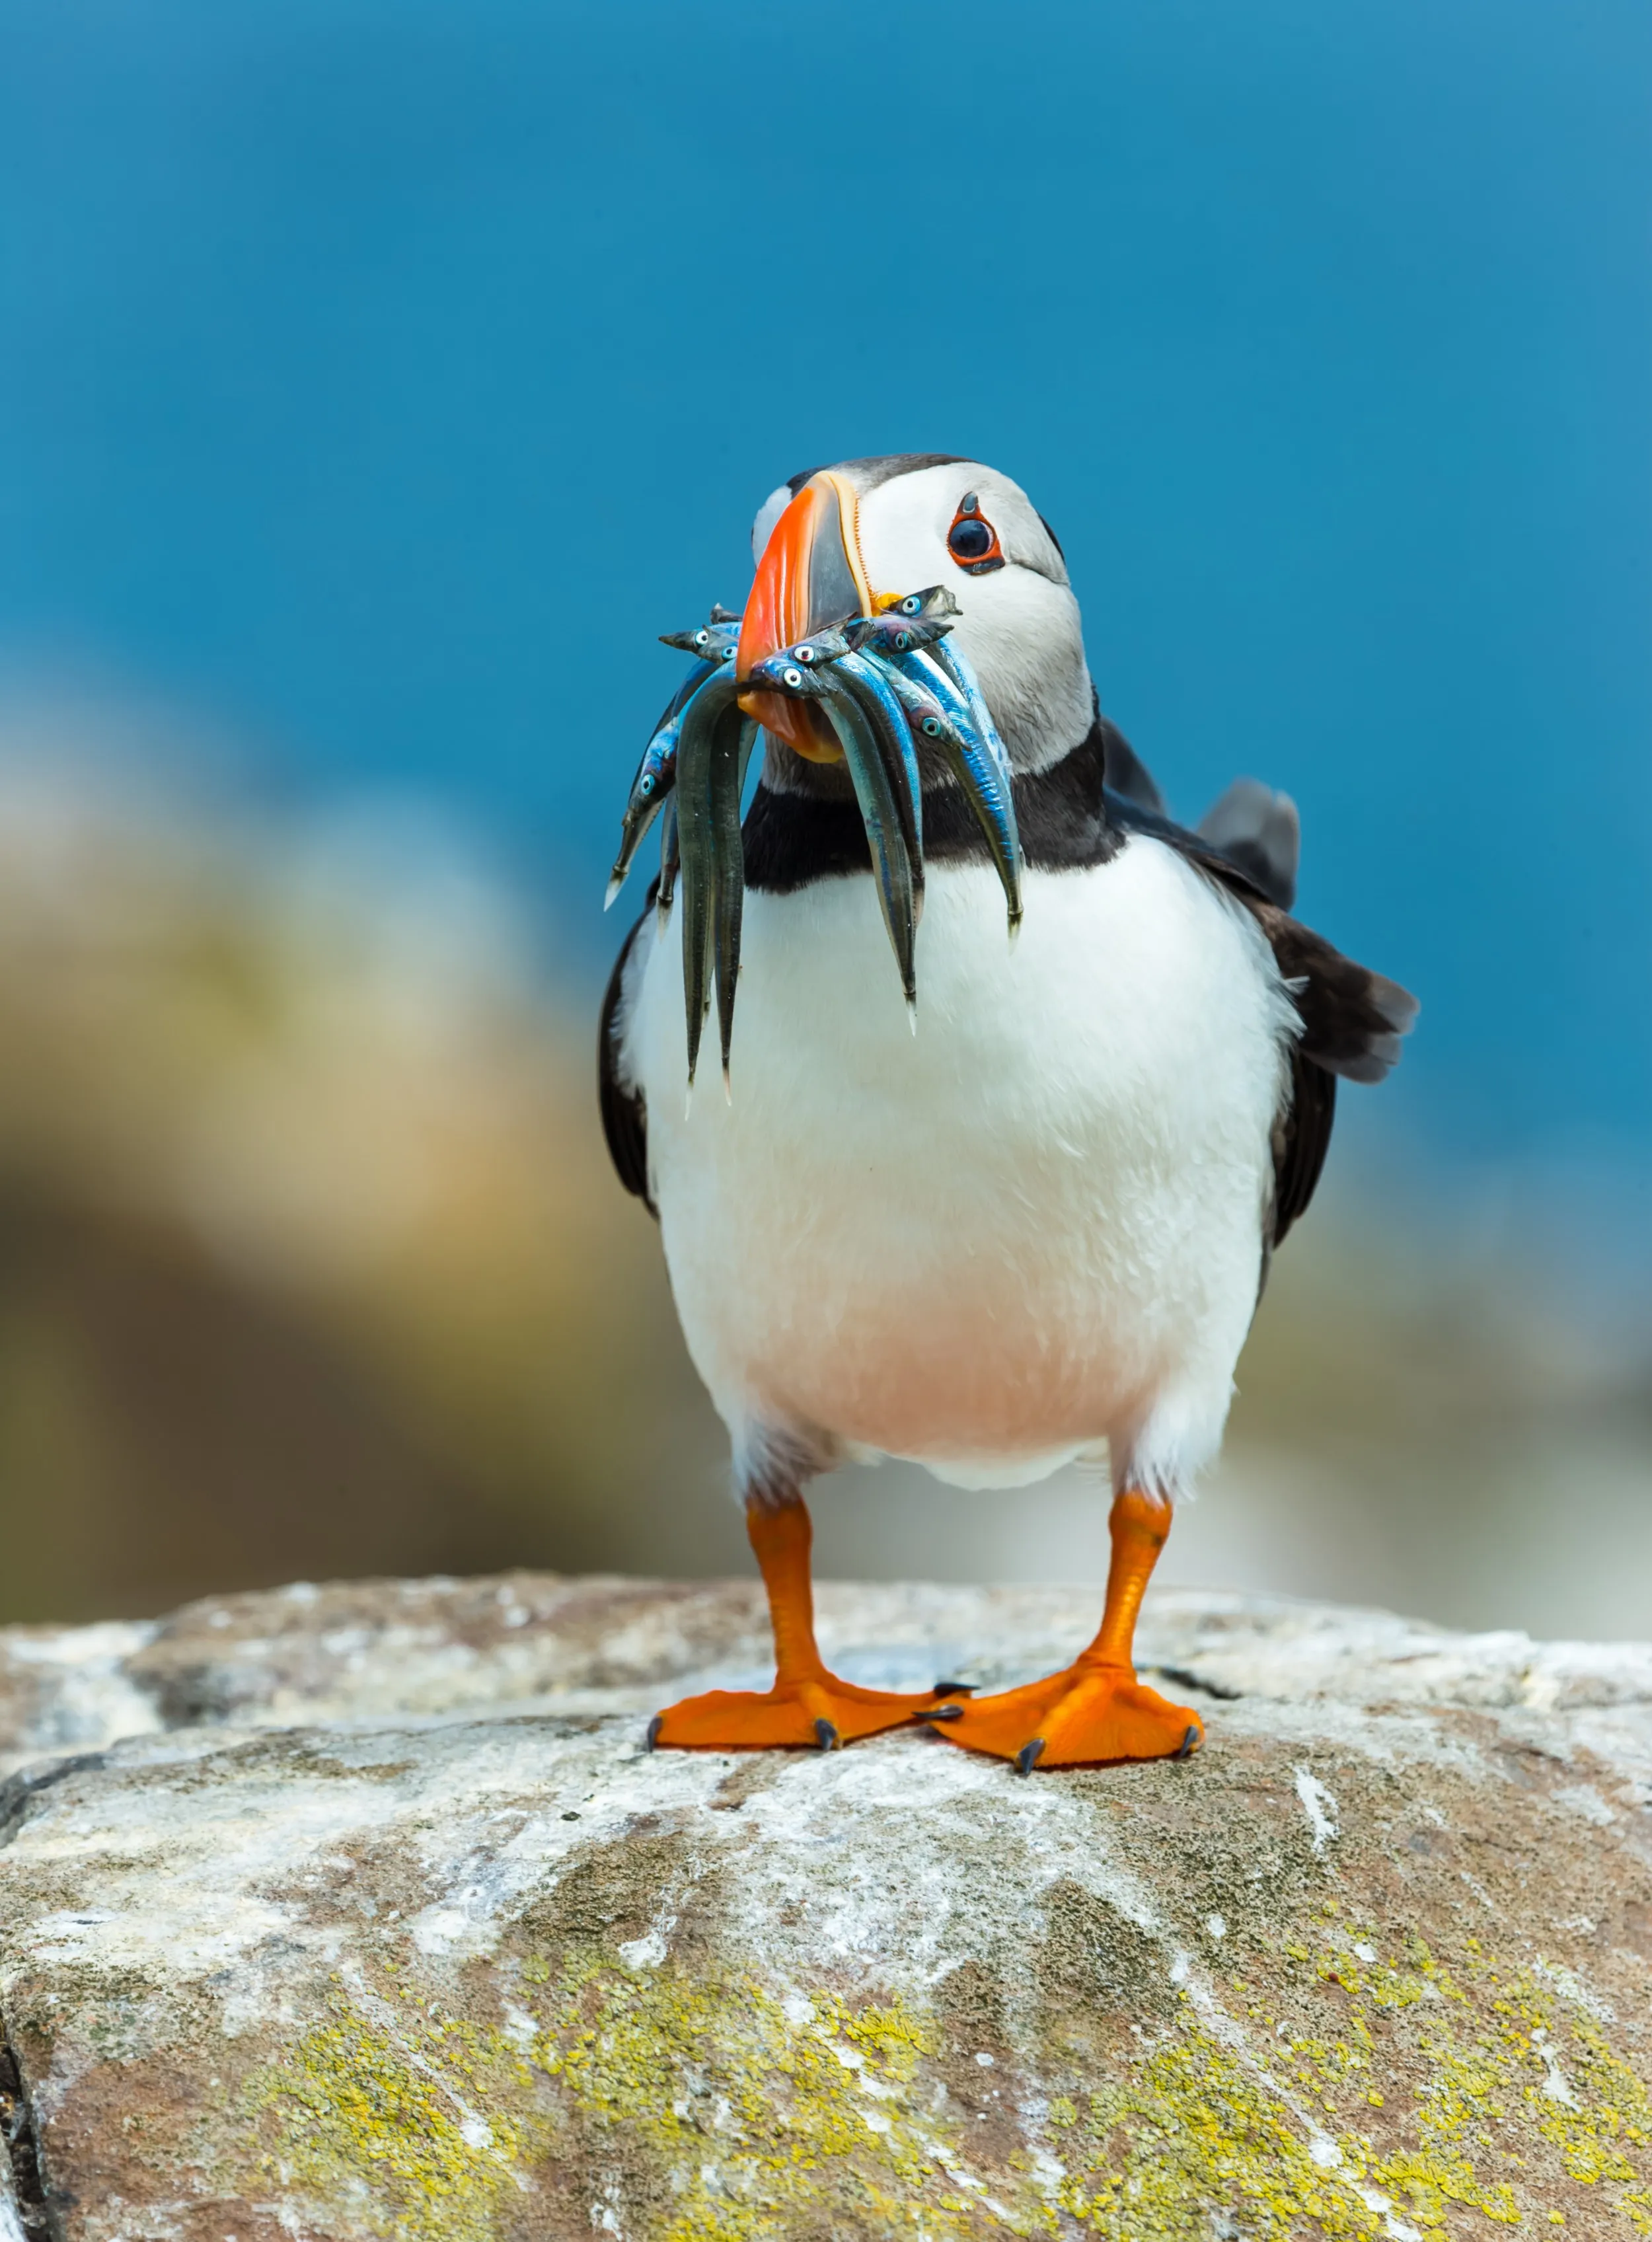 A Puffin standing on a rock, its beak full of sandeels.